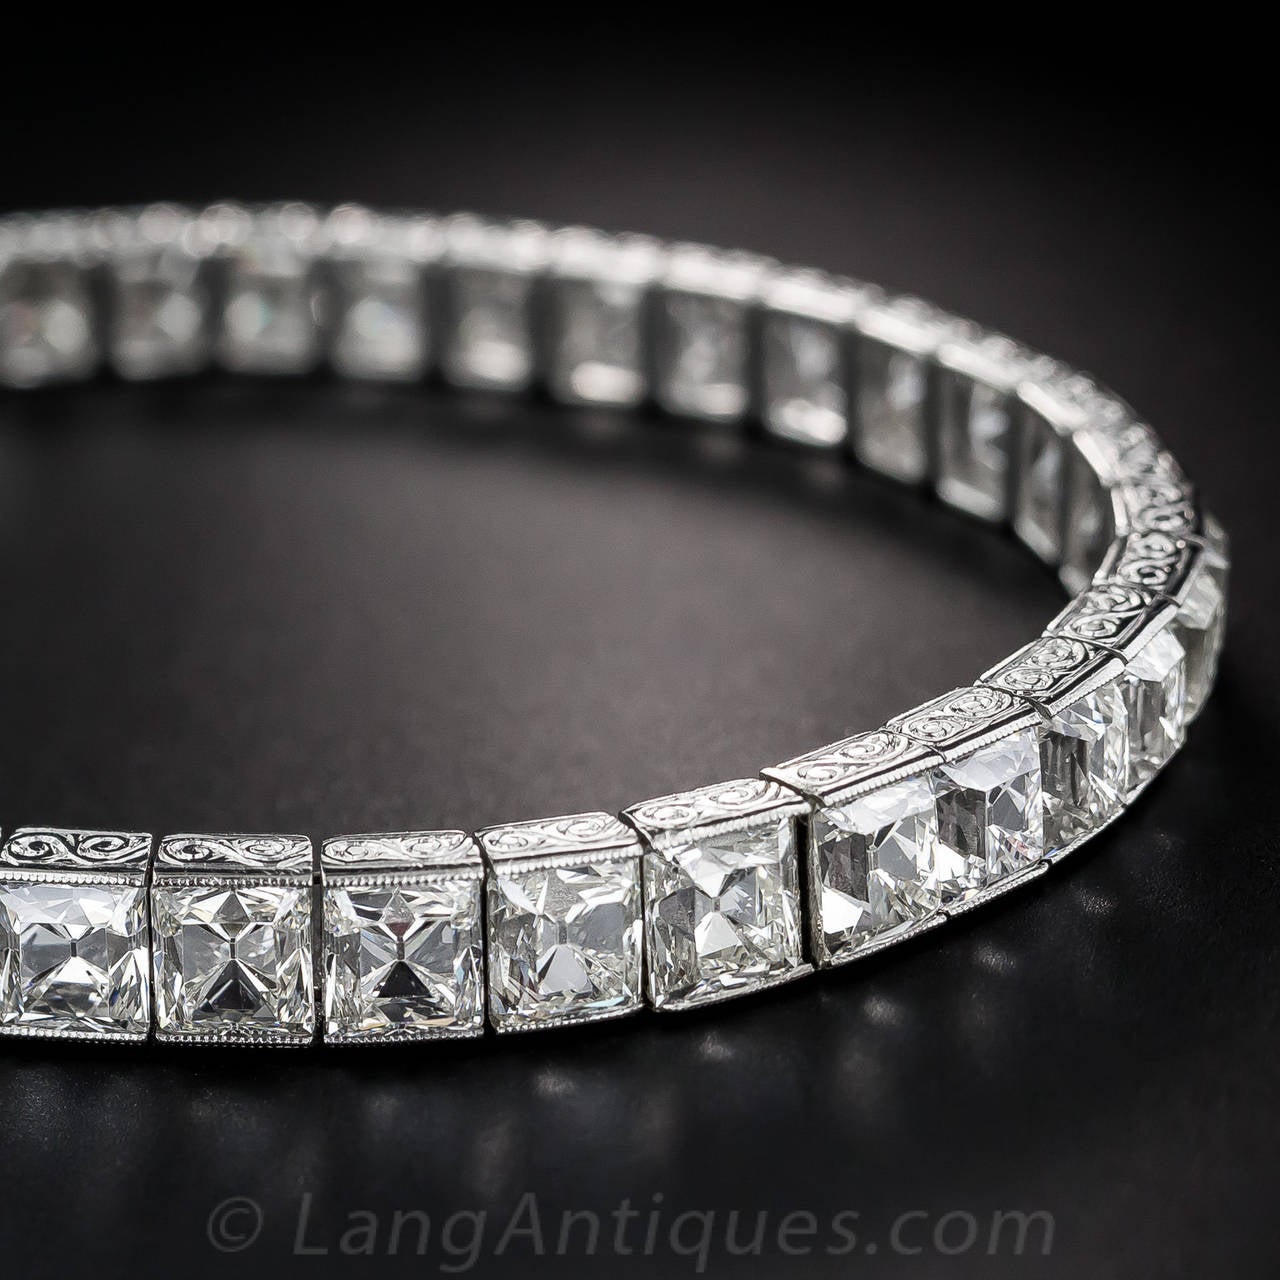 Simply stated, the most stunning and singularly sensational, Art Deco straight line diamond bracelet we've ever seen. 23 (at least) carats of bright-white, ultra-sparkling rectangular and square-cut diamonds with rare, highly-distinctive and hard to